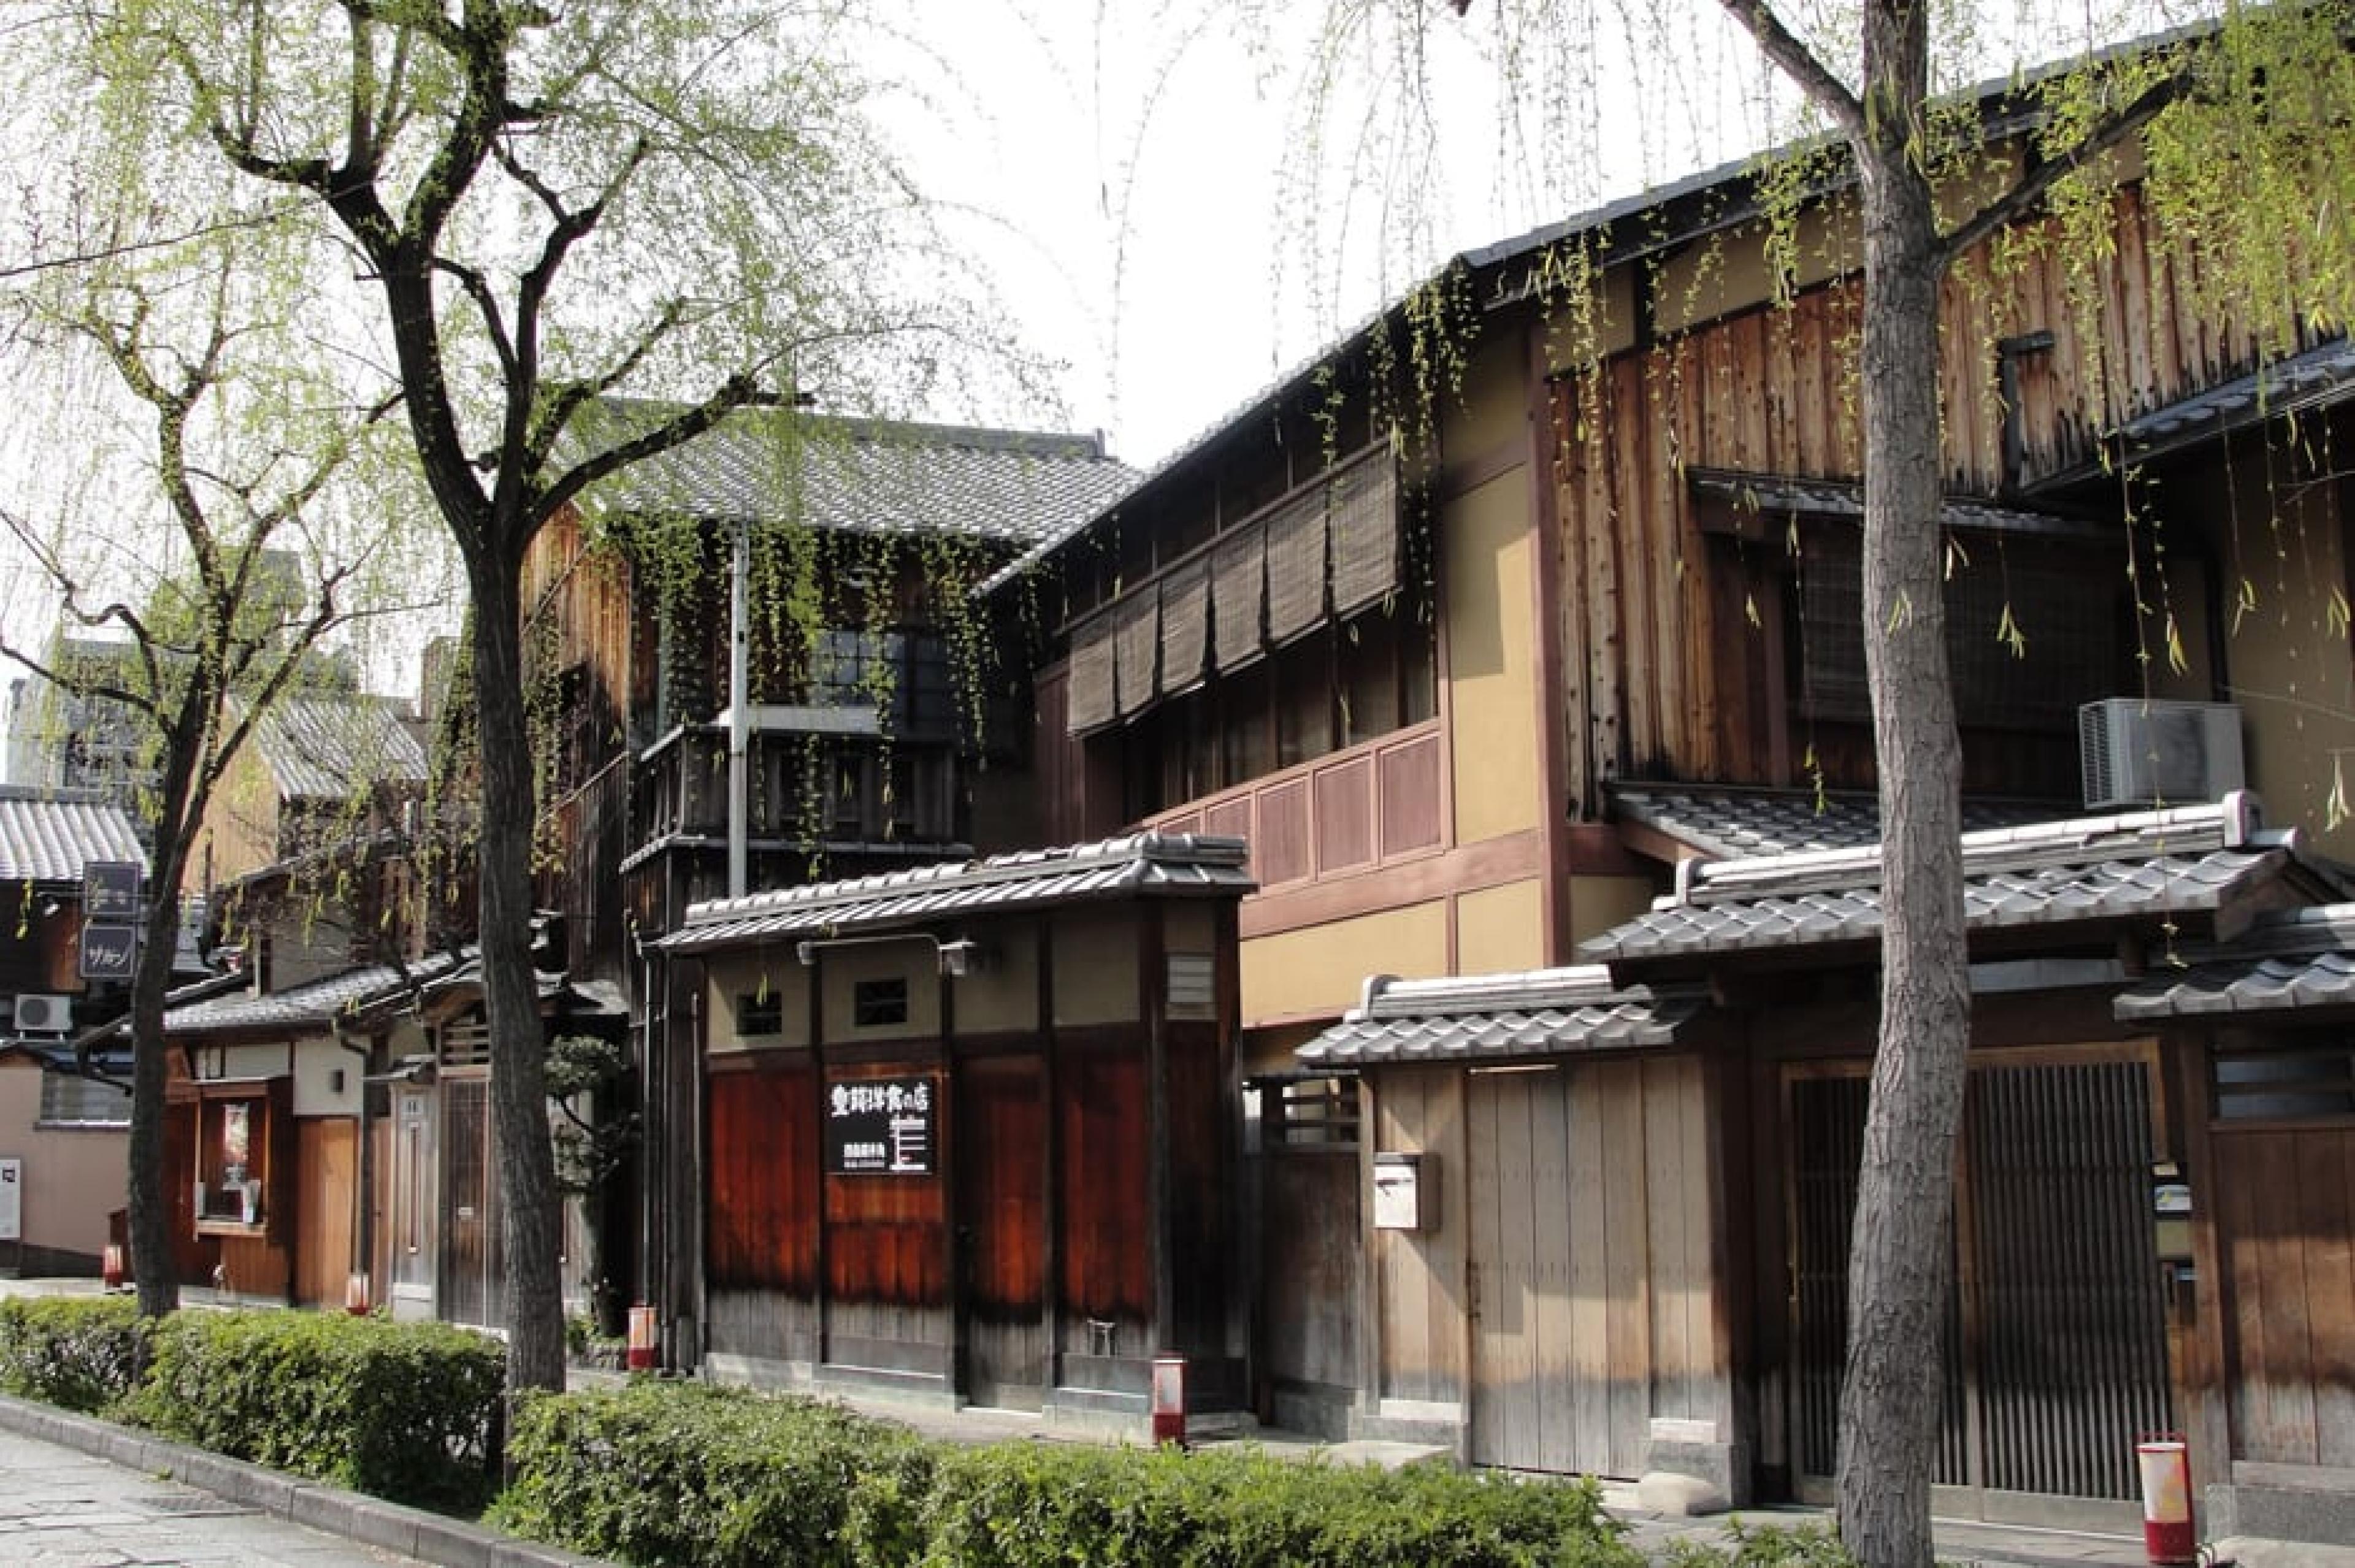 Exterior View - Gion District,Kyoto, Japan - Courtesy of Rachel H.